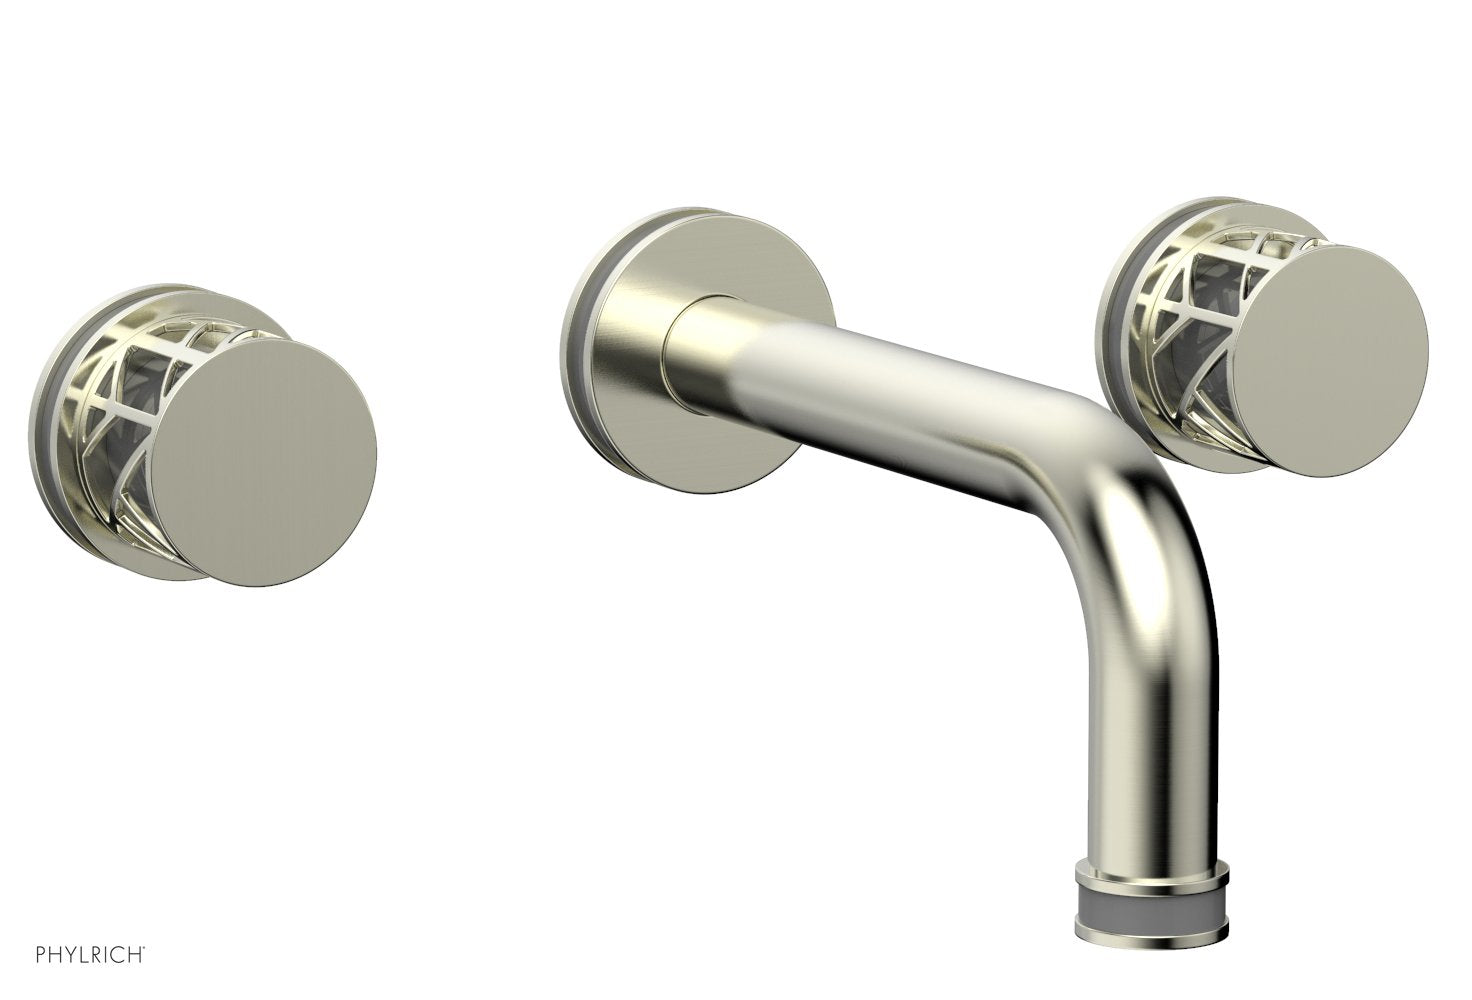 Phylrich JOLIE Wall Lavatory Set - Round Handles with "Grey" Accents